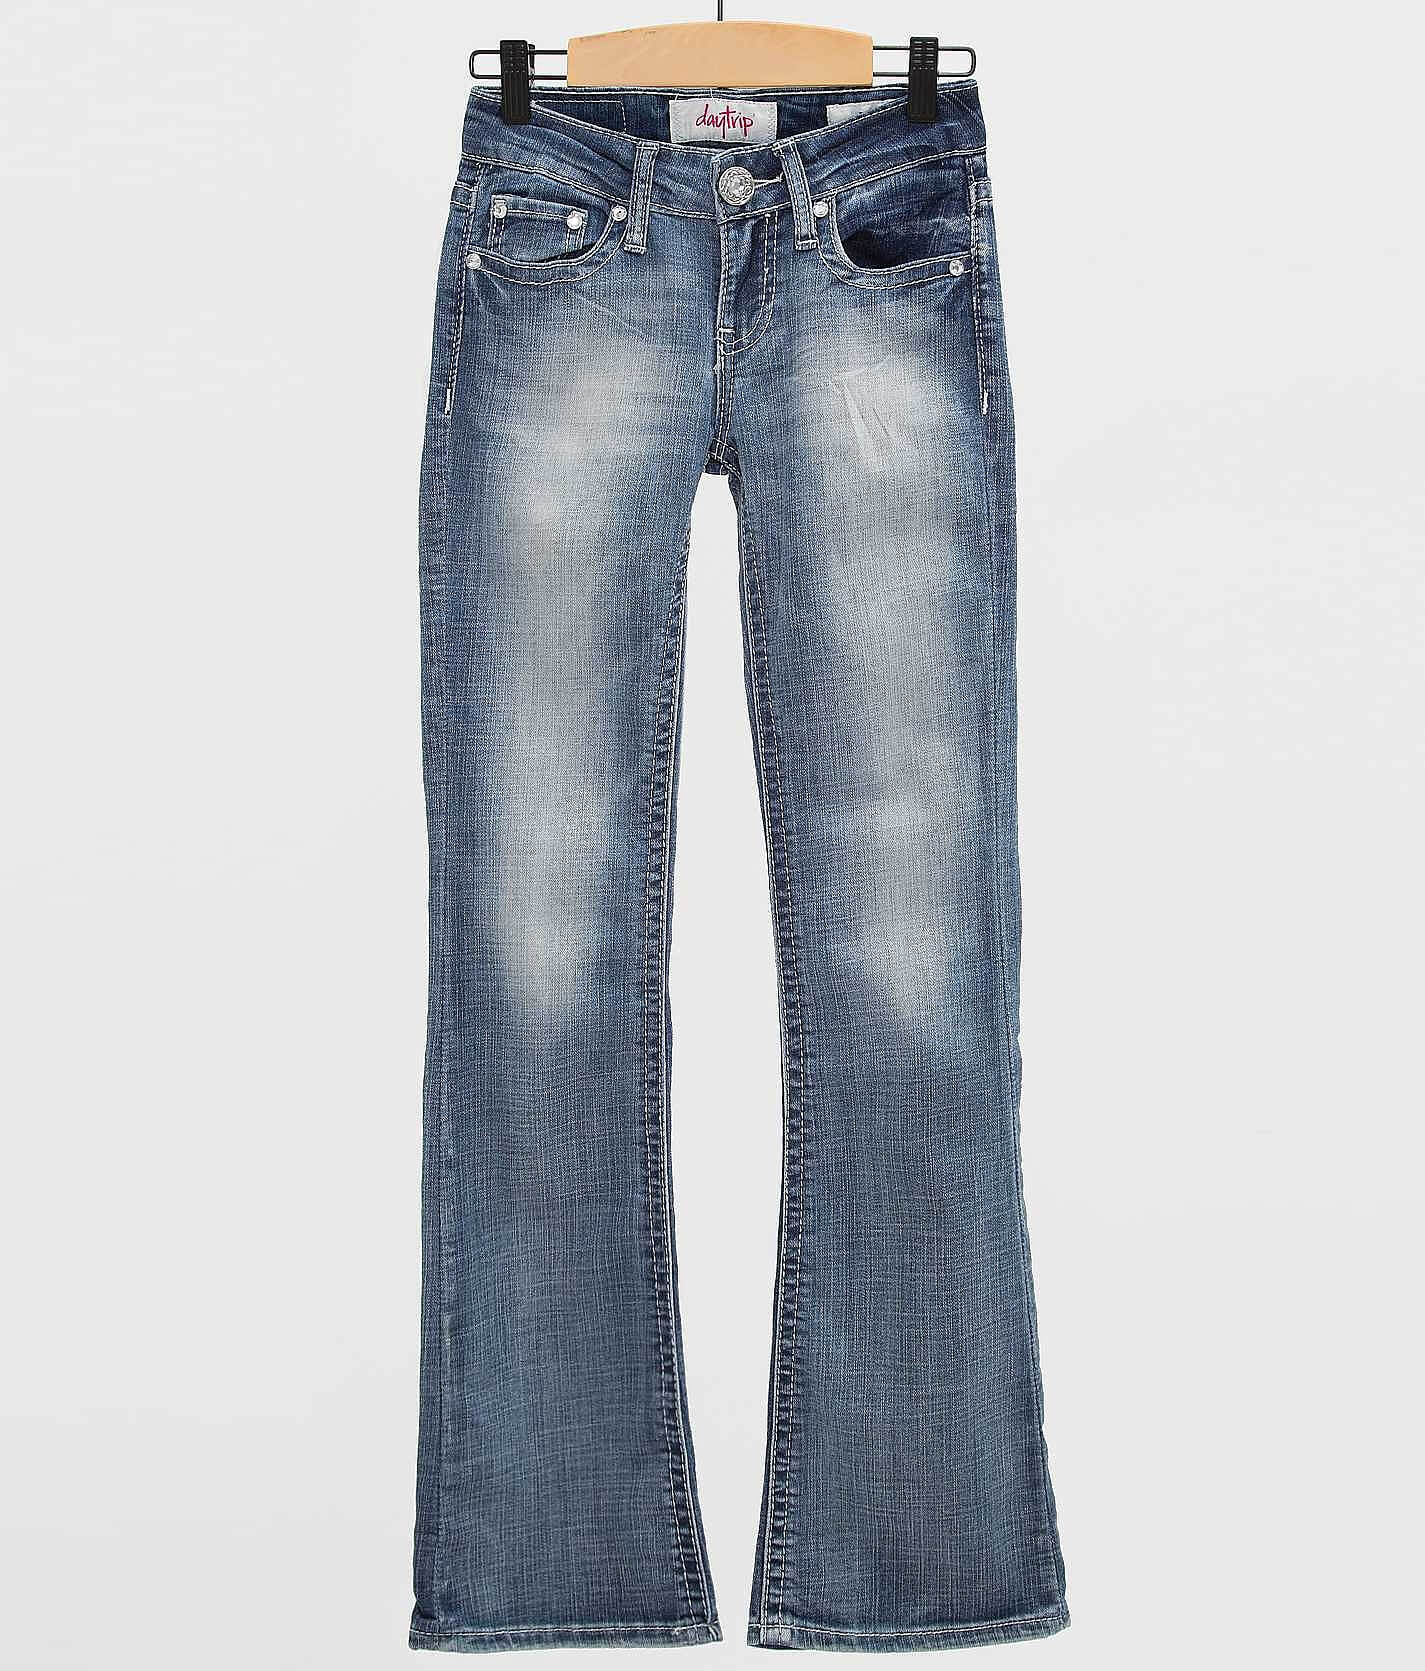 daytrip jeans size guide